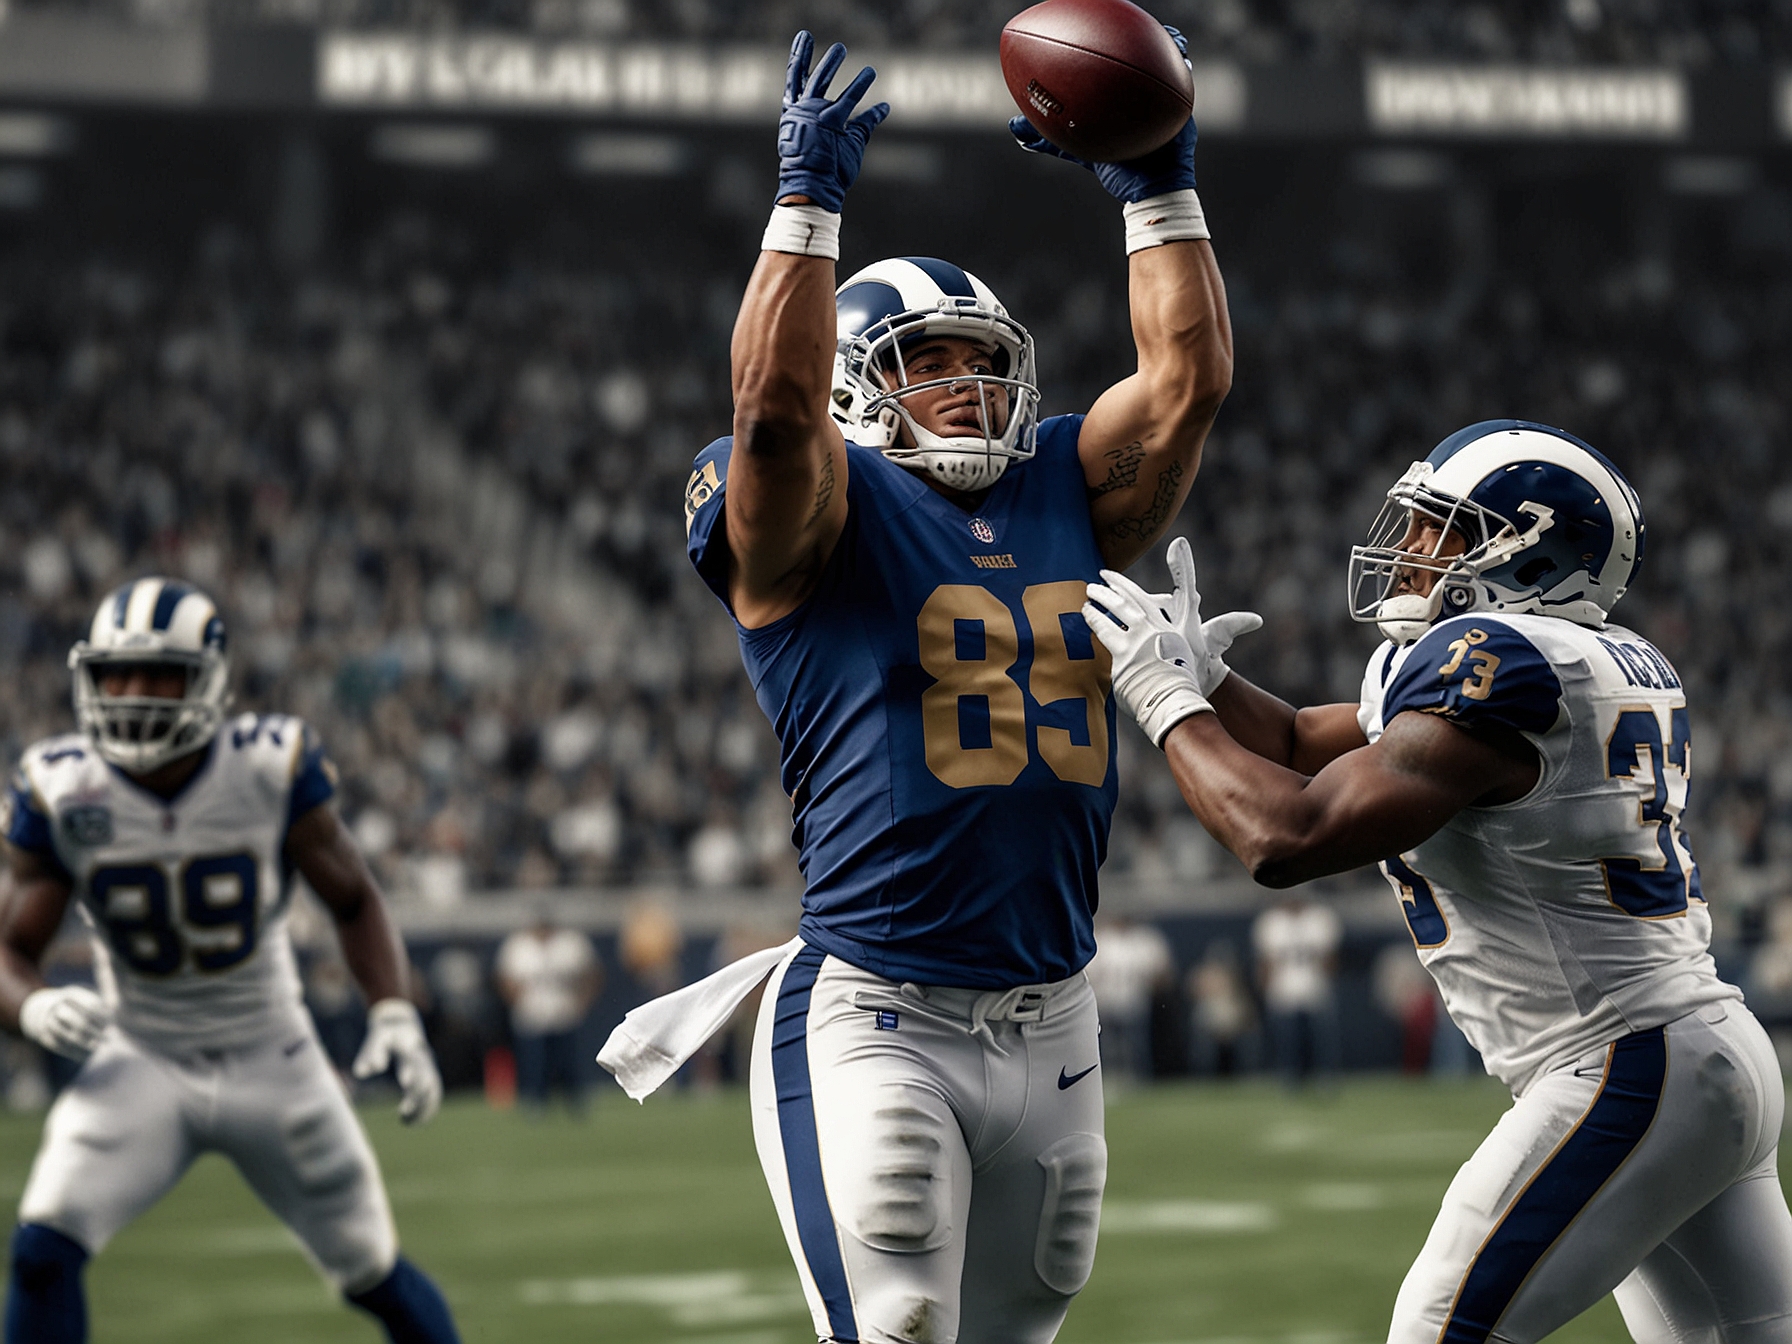 Puka Nacua making a spectacular catch under pressure, illustrating his impact on the Los Angeles Rams' offensive lineup and highlighting his key role in the team's improved performance.